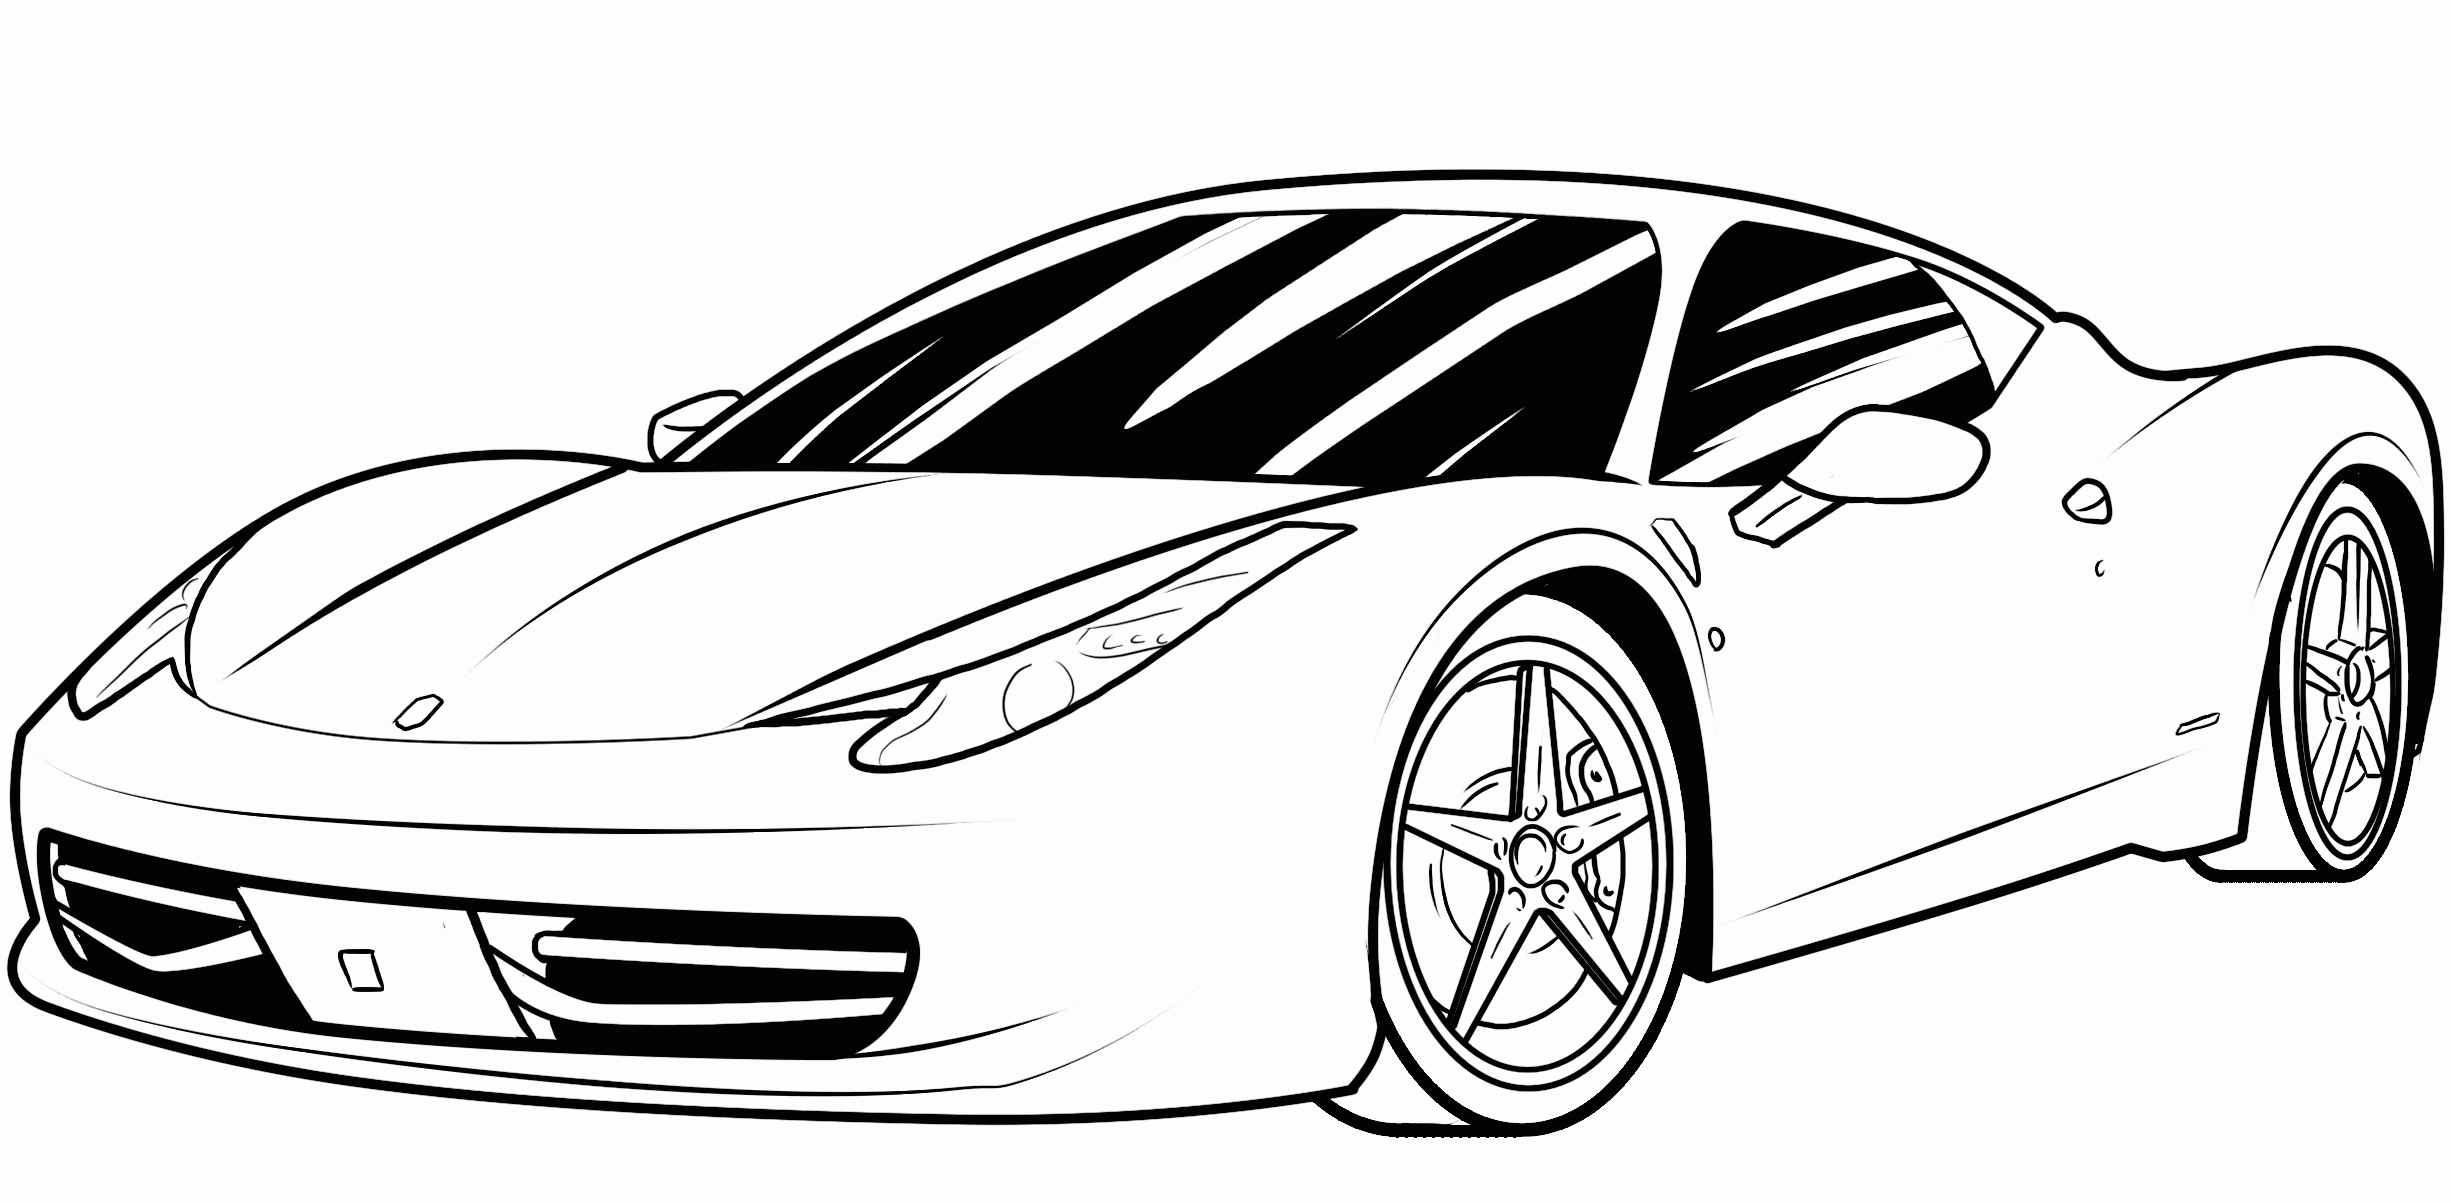 cool race car coloring pages ferrari Coloring4free